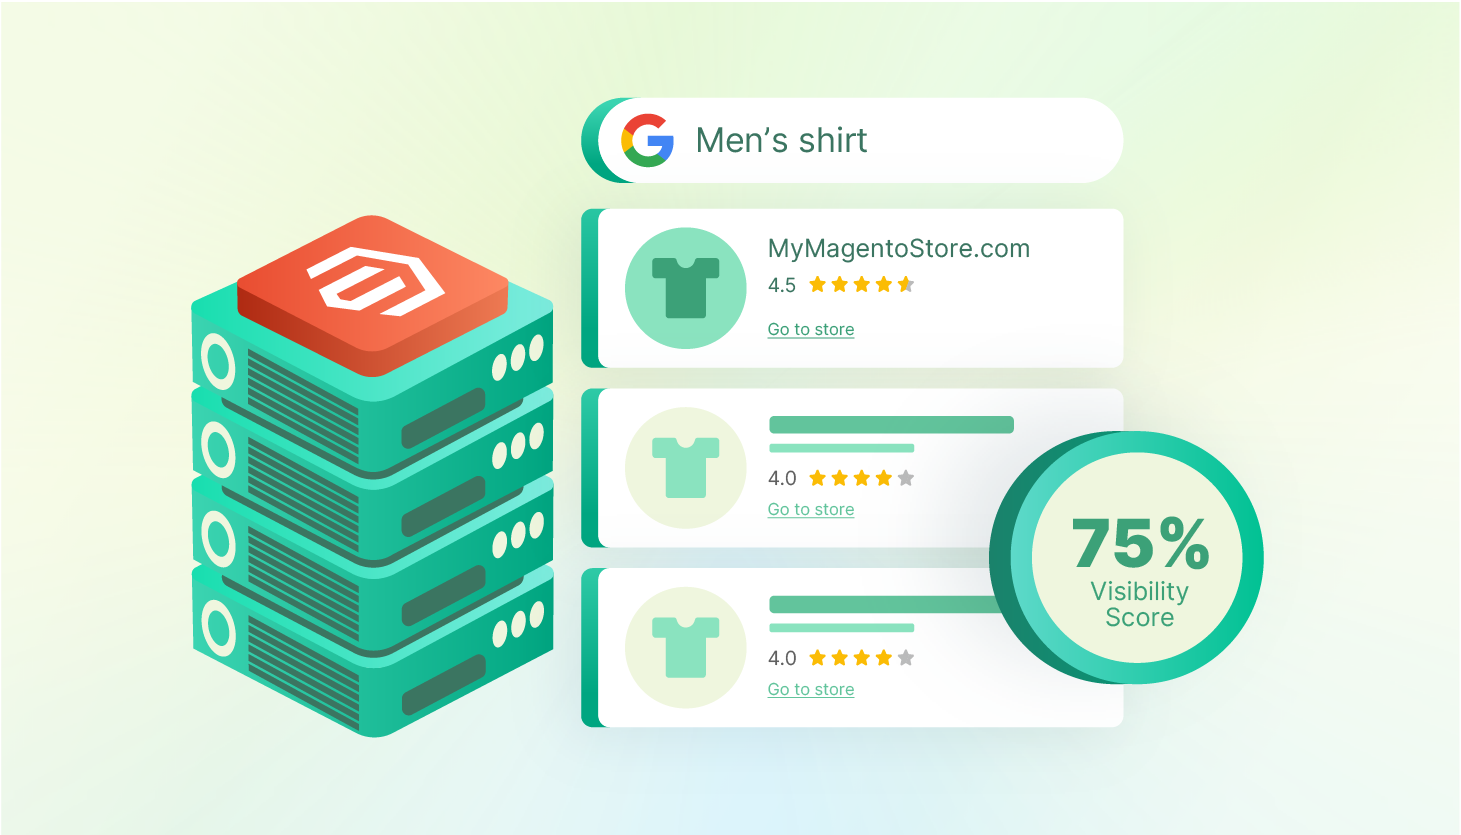 Best Hosting Company for Magento: Boost Your Store’s Google Visibility Score